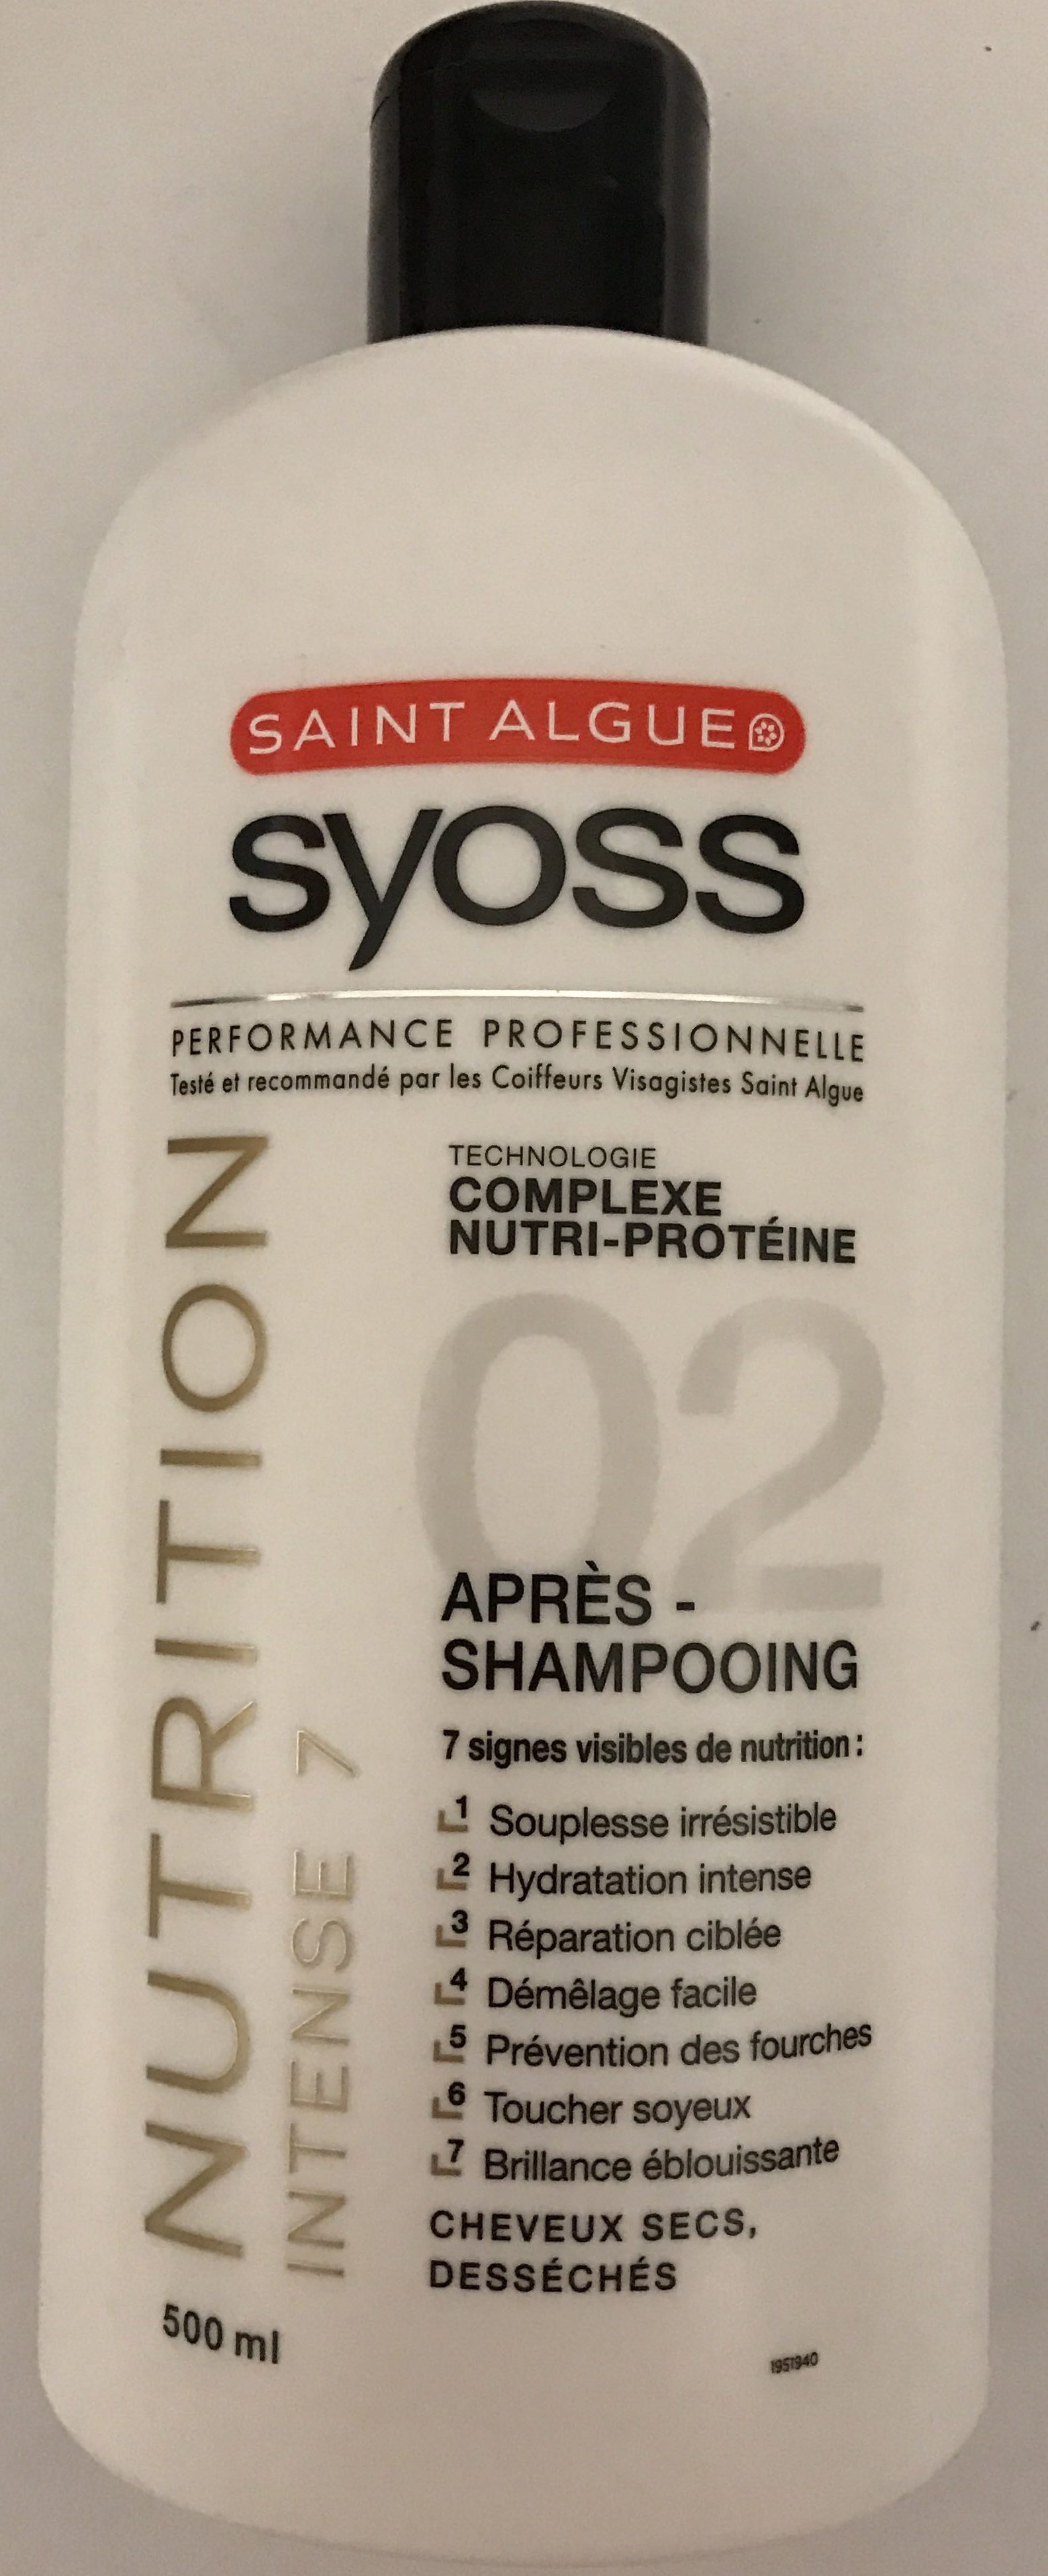 Syoss Nutrition Intense 7 Après-Shampooing - Product - fr